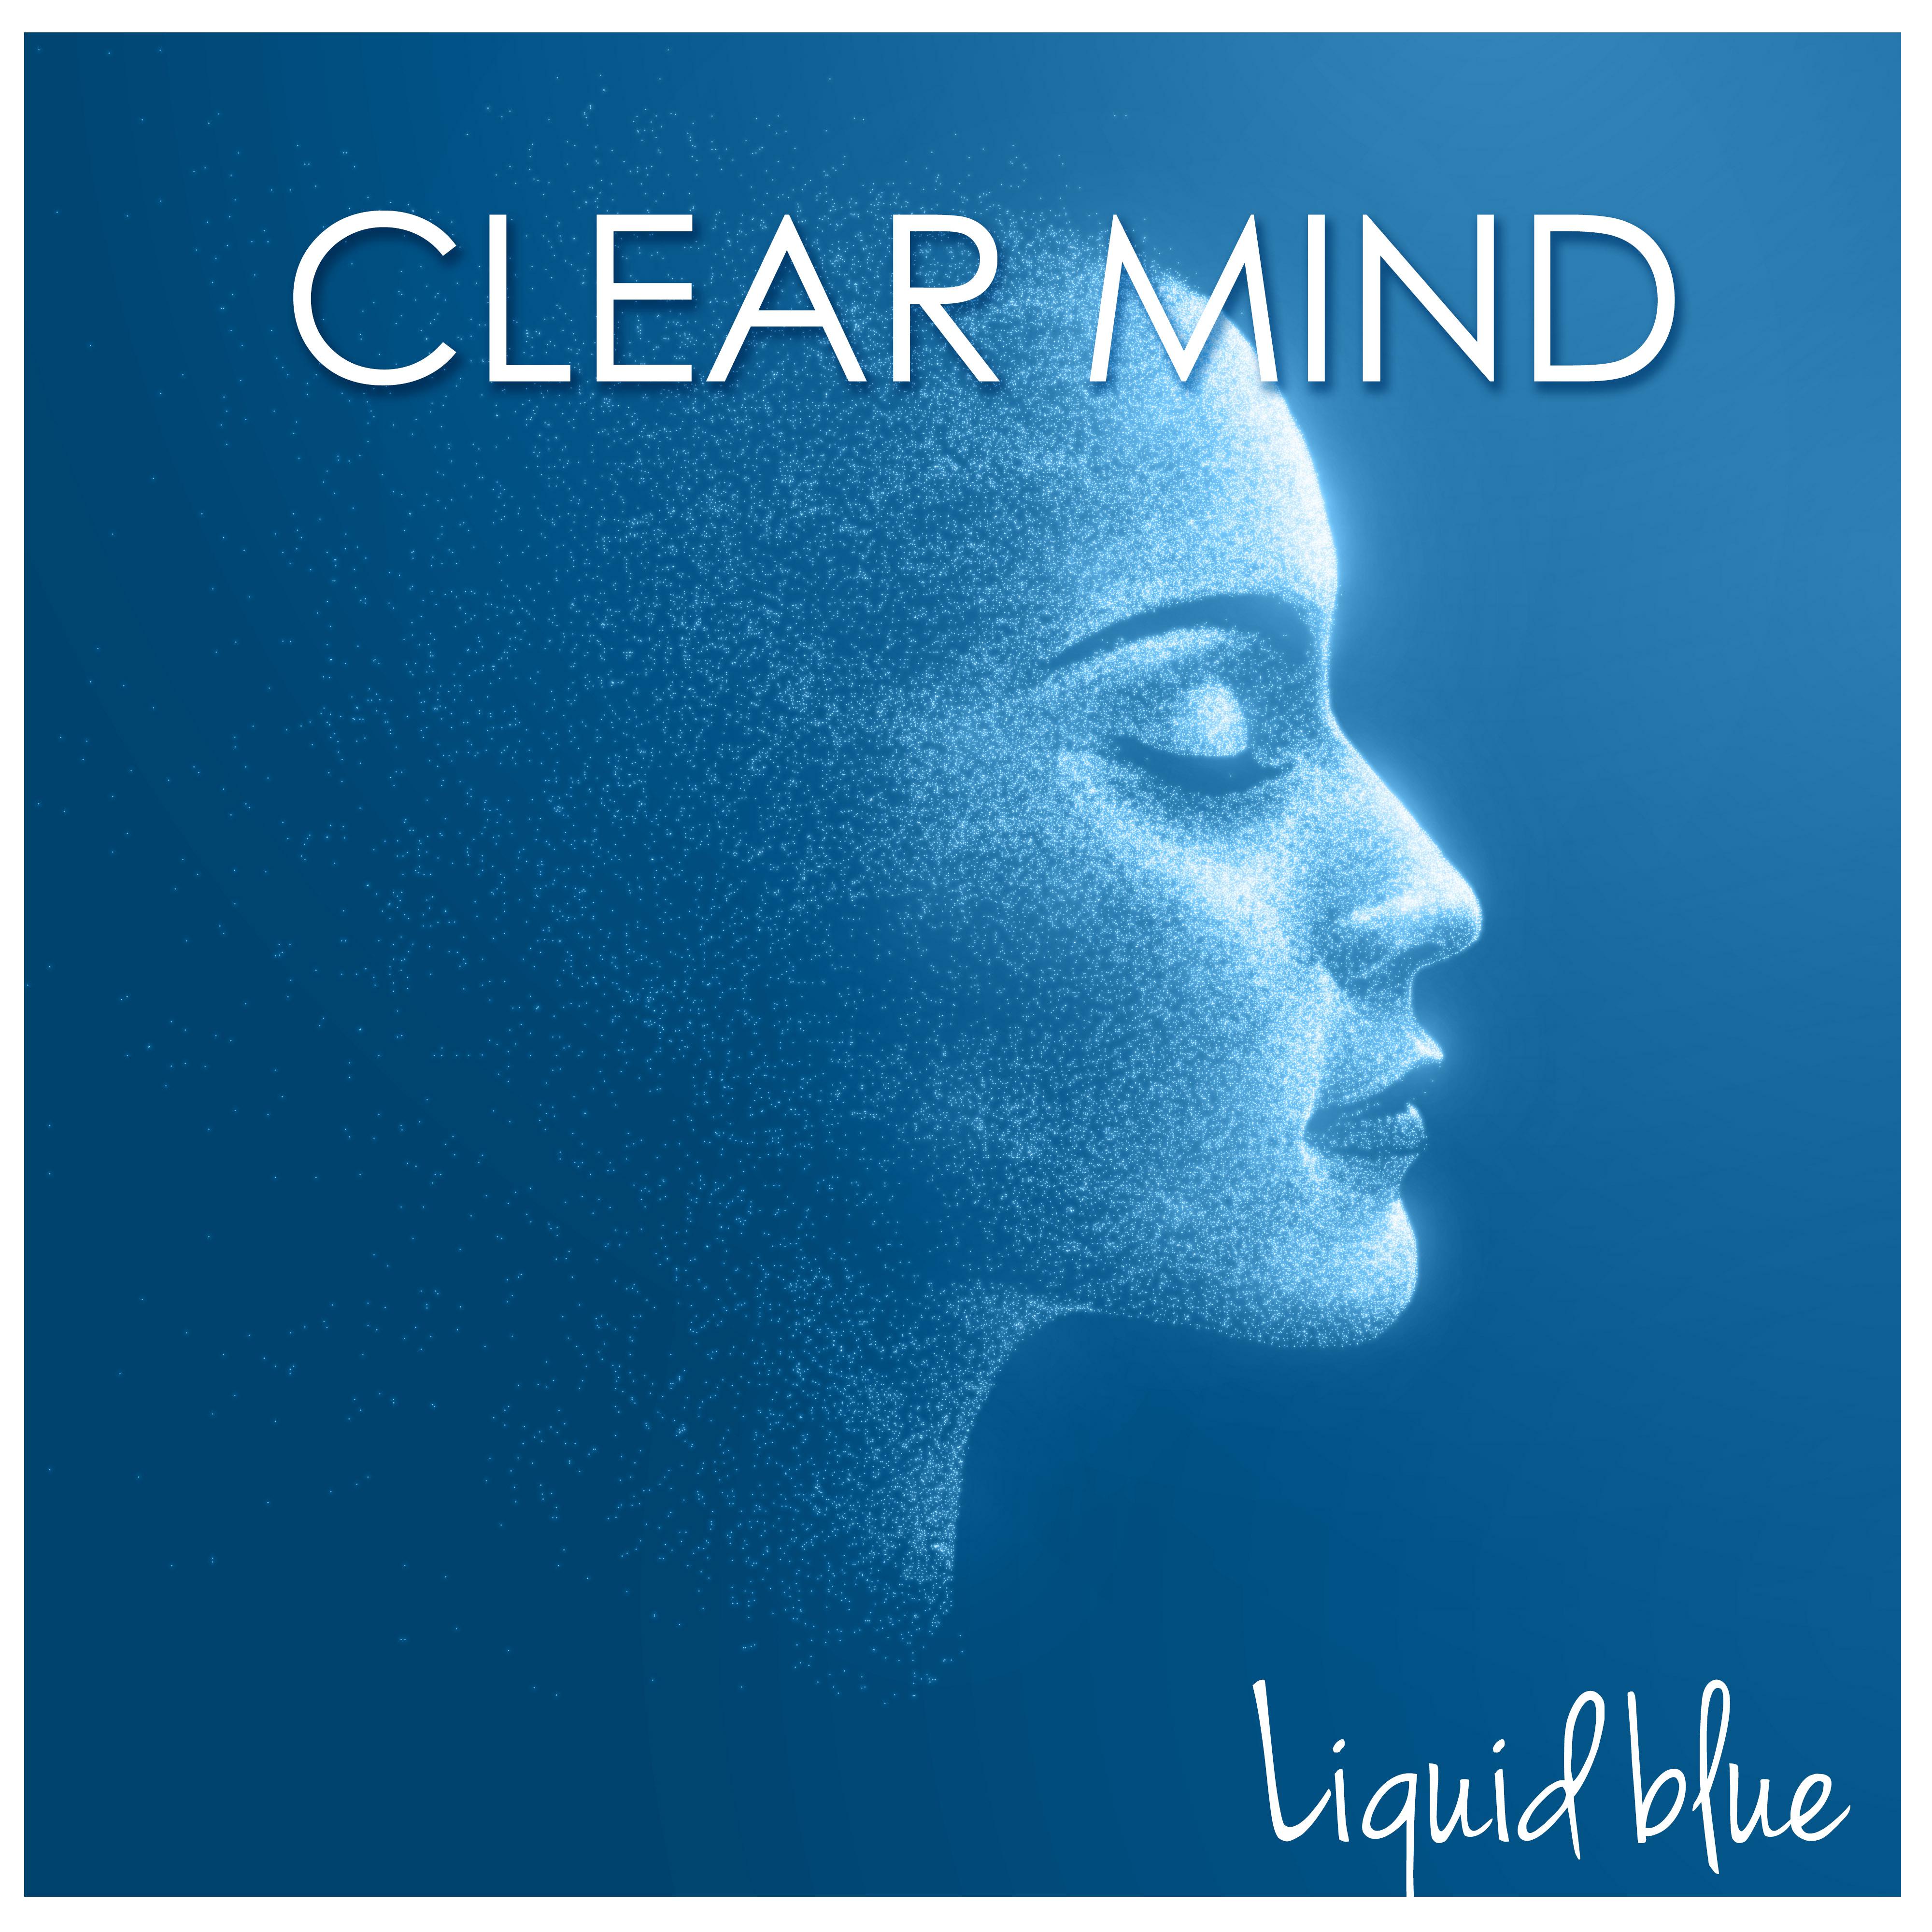 Clear Mind - Clearing New Age Piano Music for Healing your Mind, Soul and Spirit with Liquid Sounds